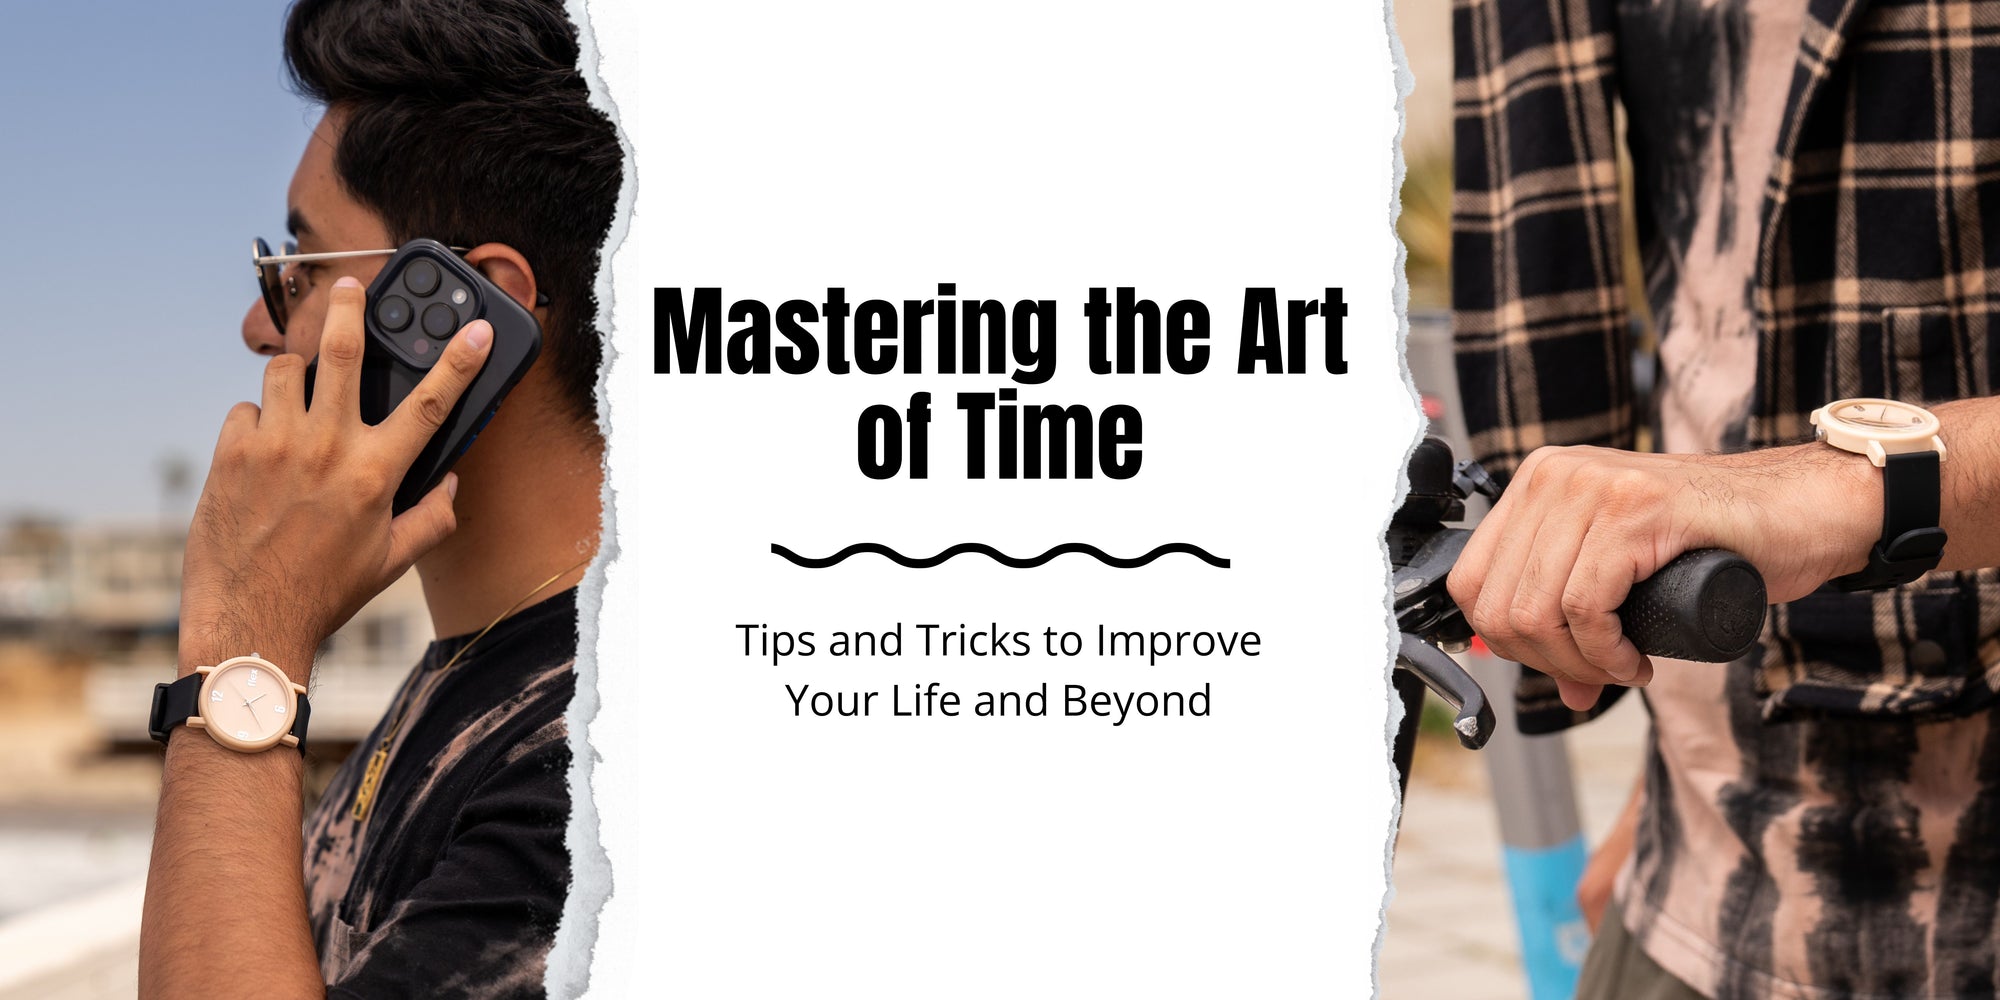 Mastering the Art of Time: Tips and Tricks to Improve Your Life and Beyond